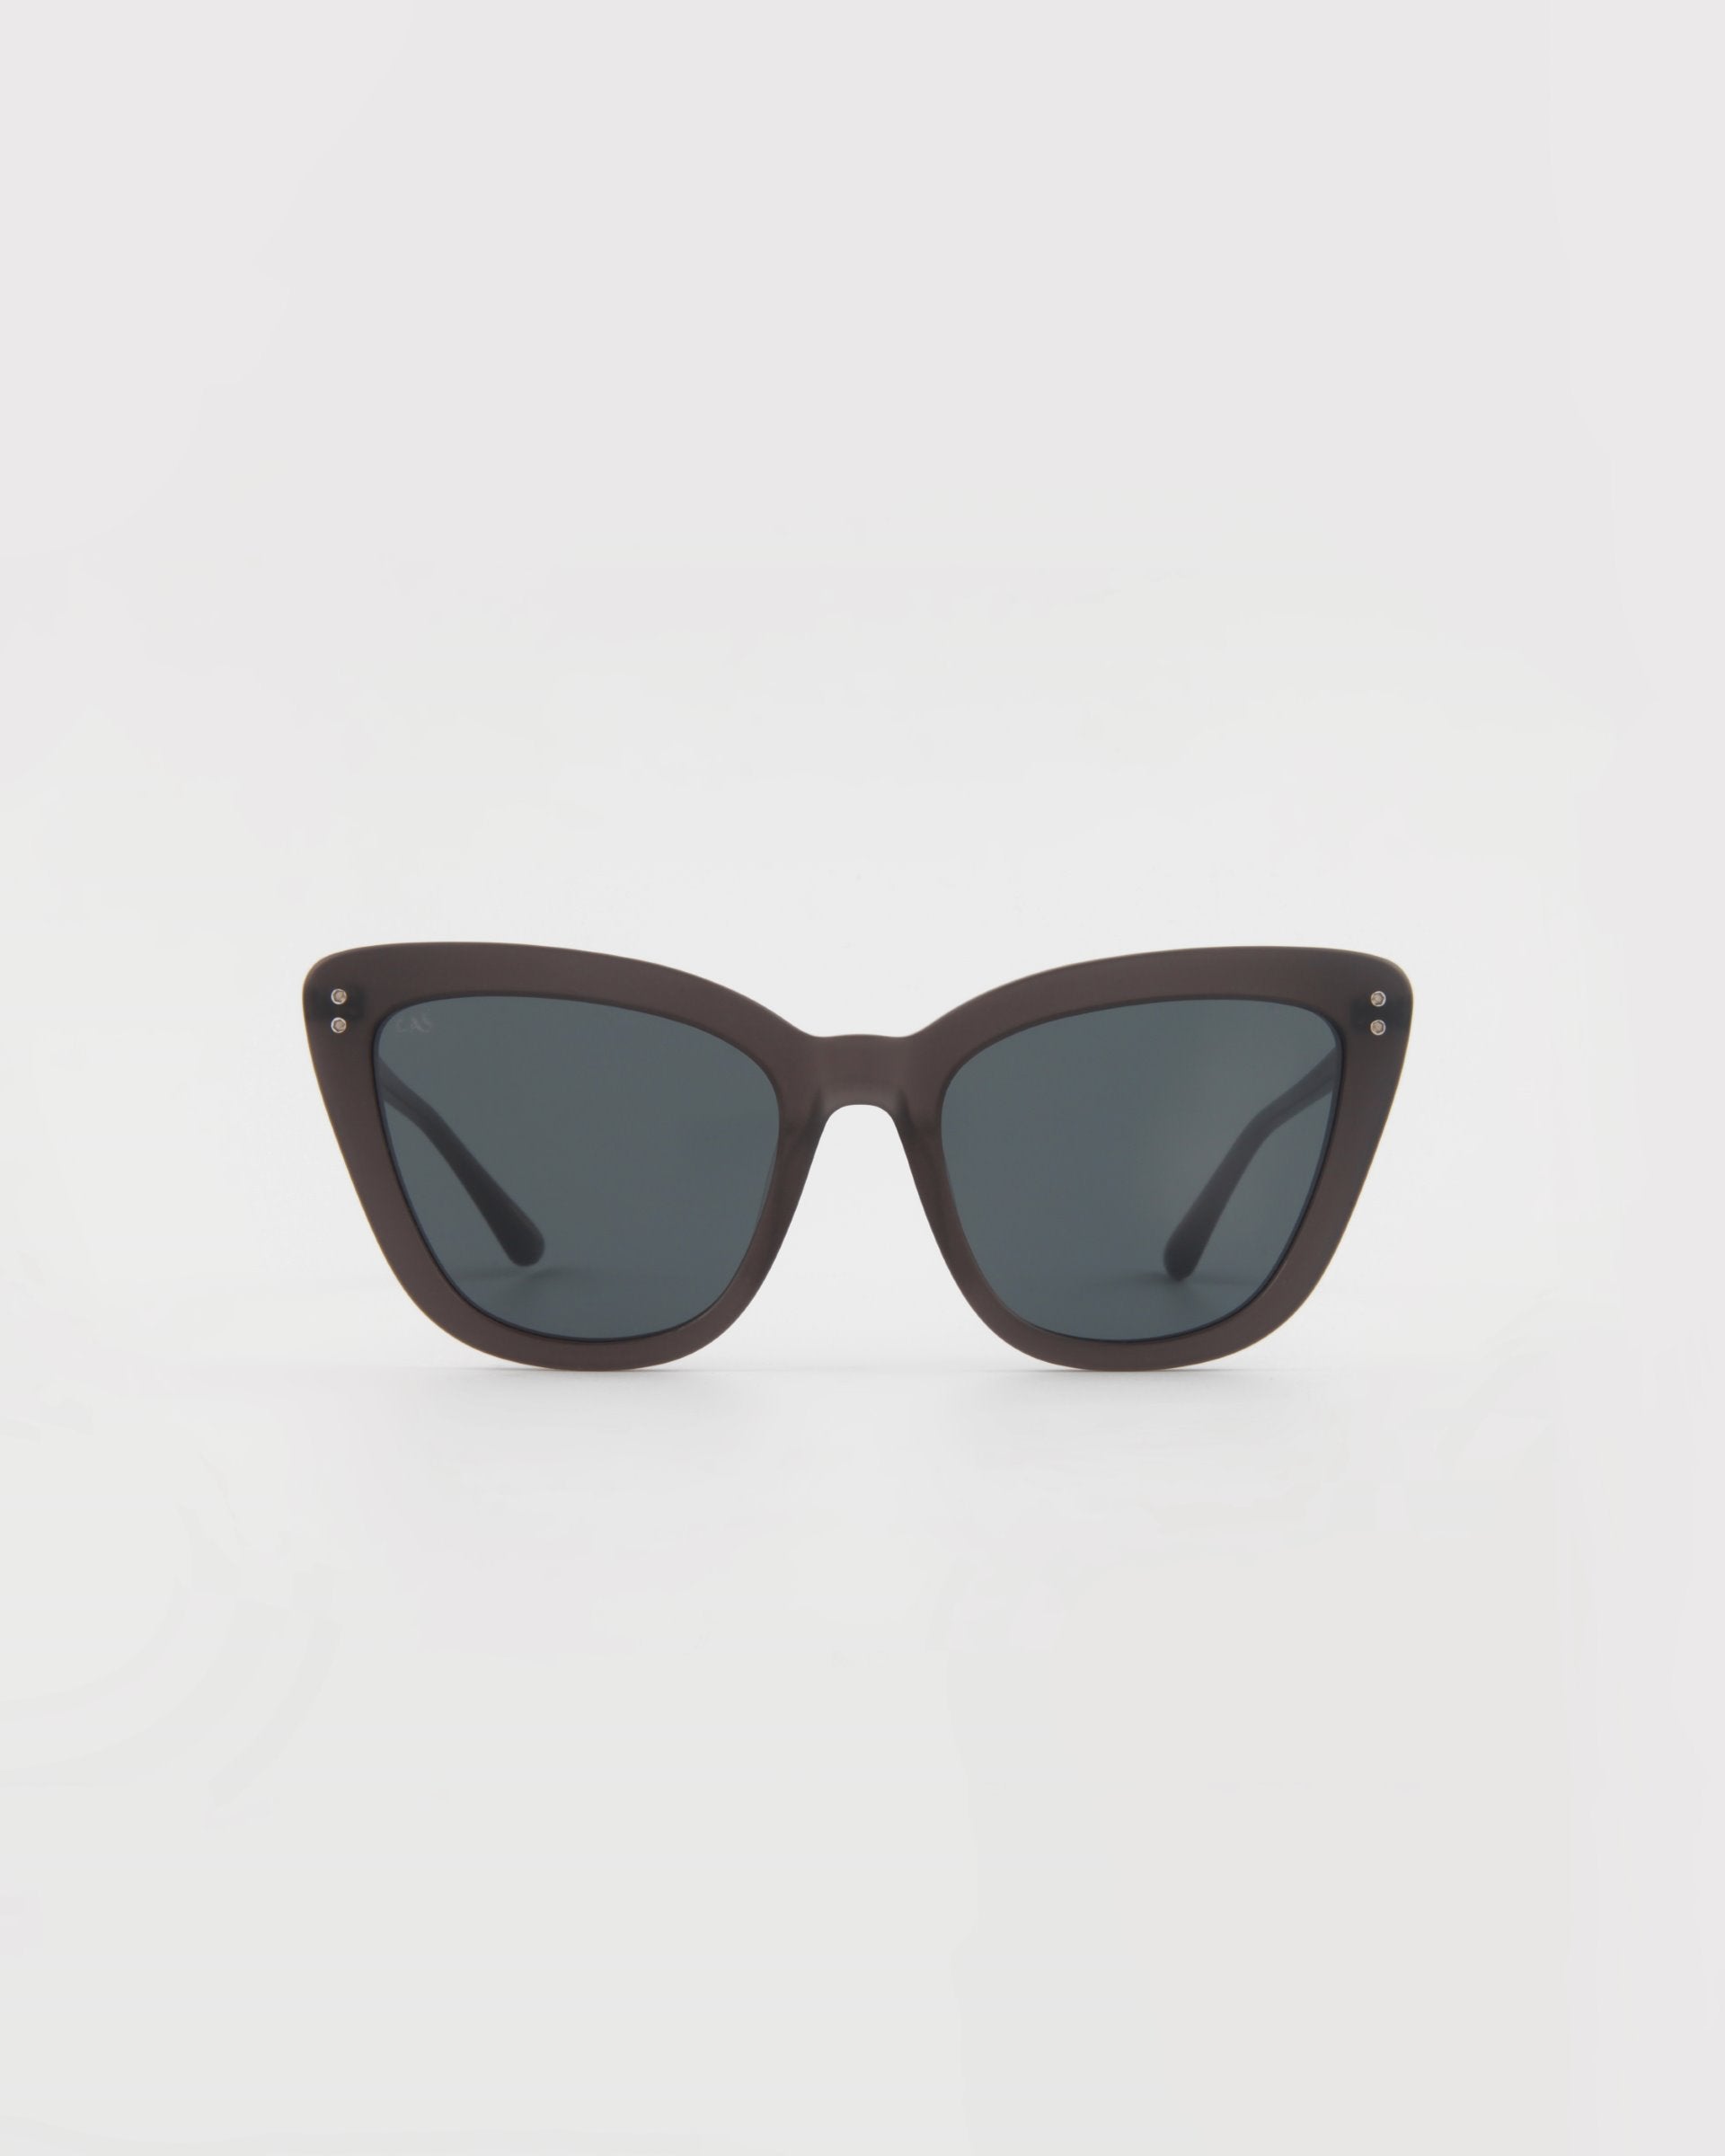 A pair of black For Art&#39;s Sake® Ice Cream sunglasses with dark tinted lenses, viewed from the front. The sunglasses have a sleek, matte finish with small metal stud details near the hinges on the corners of the frames. Handmade acetate cat-eye frames ensure both style and quality, set against a plain white background.